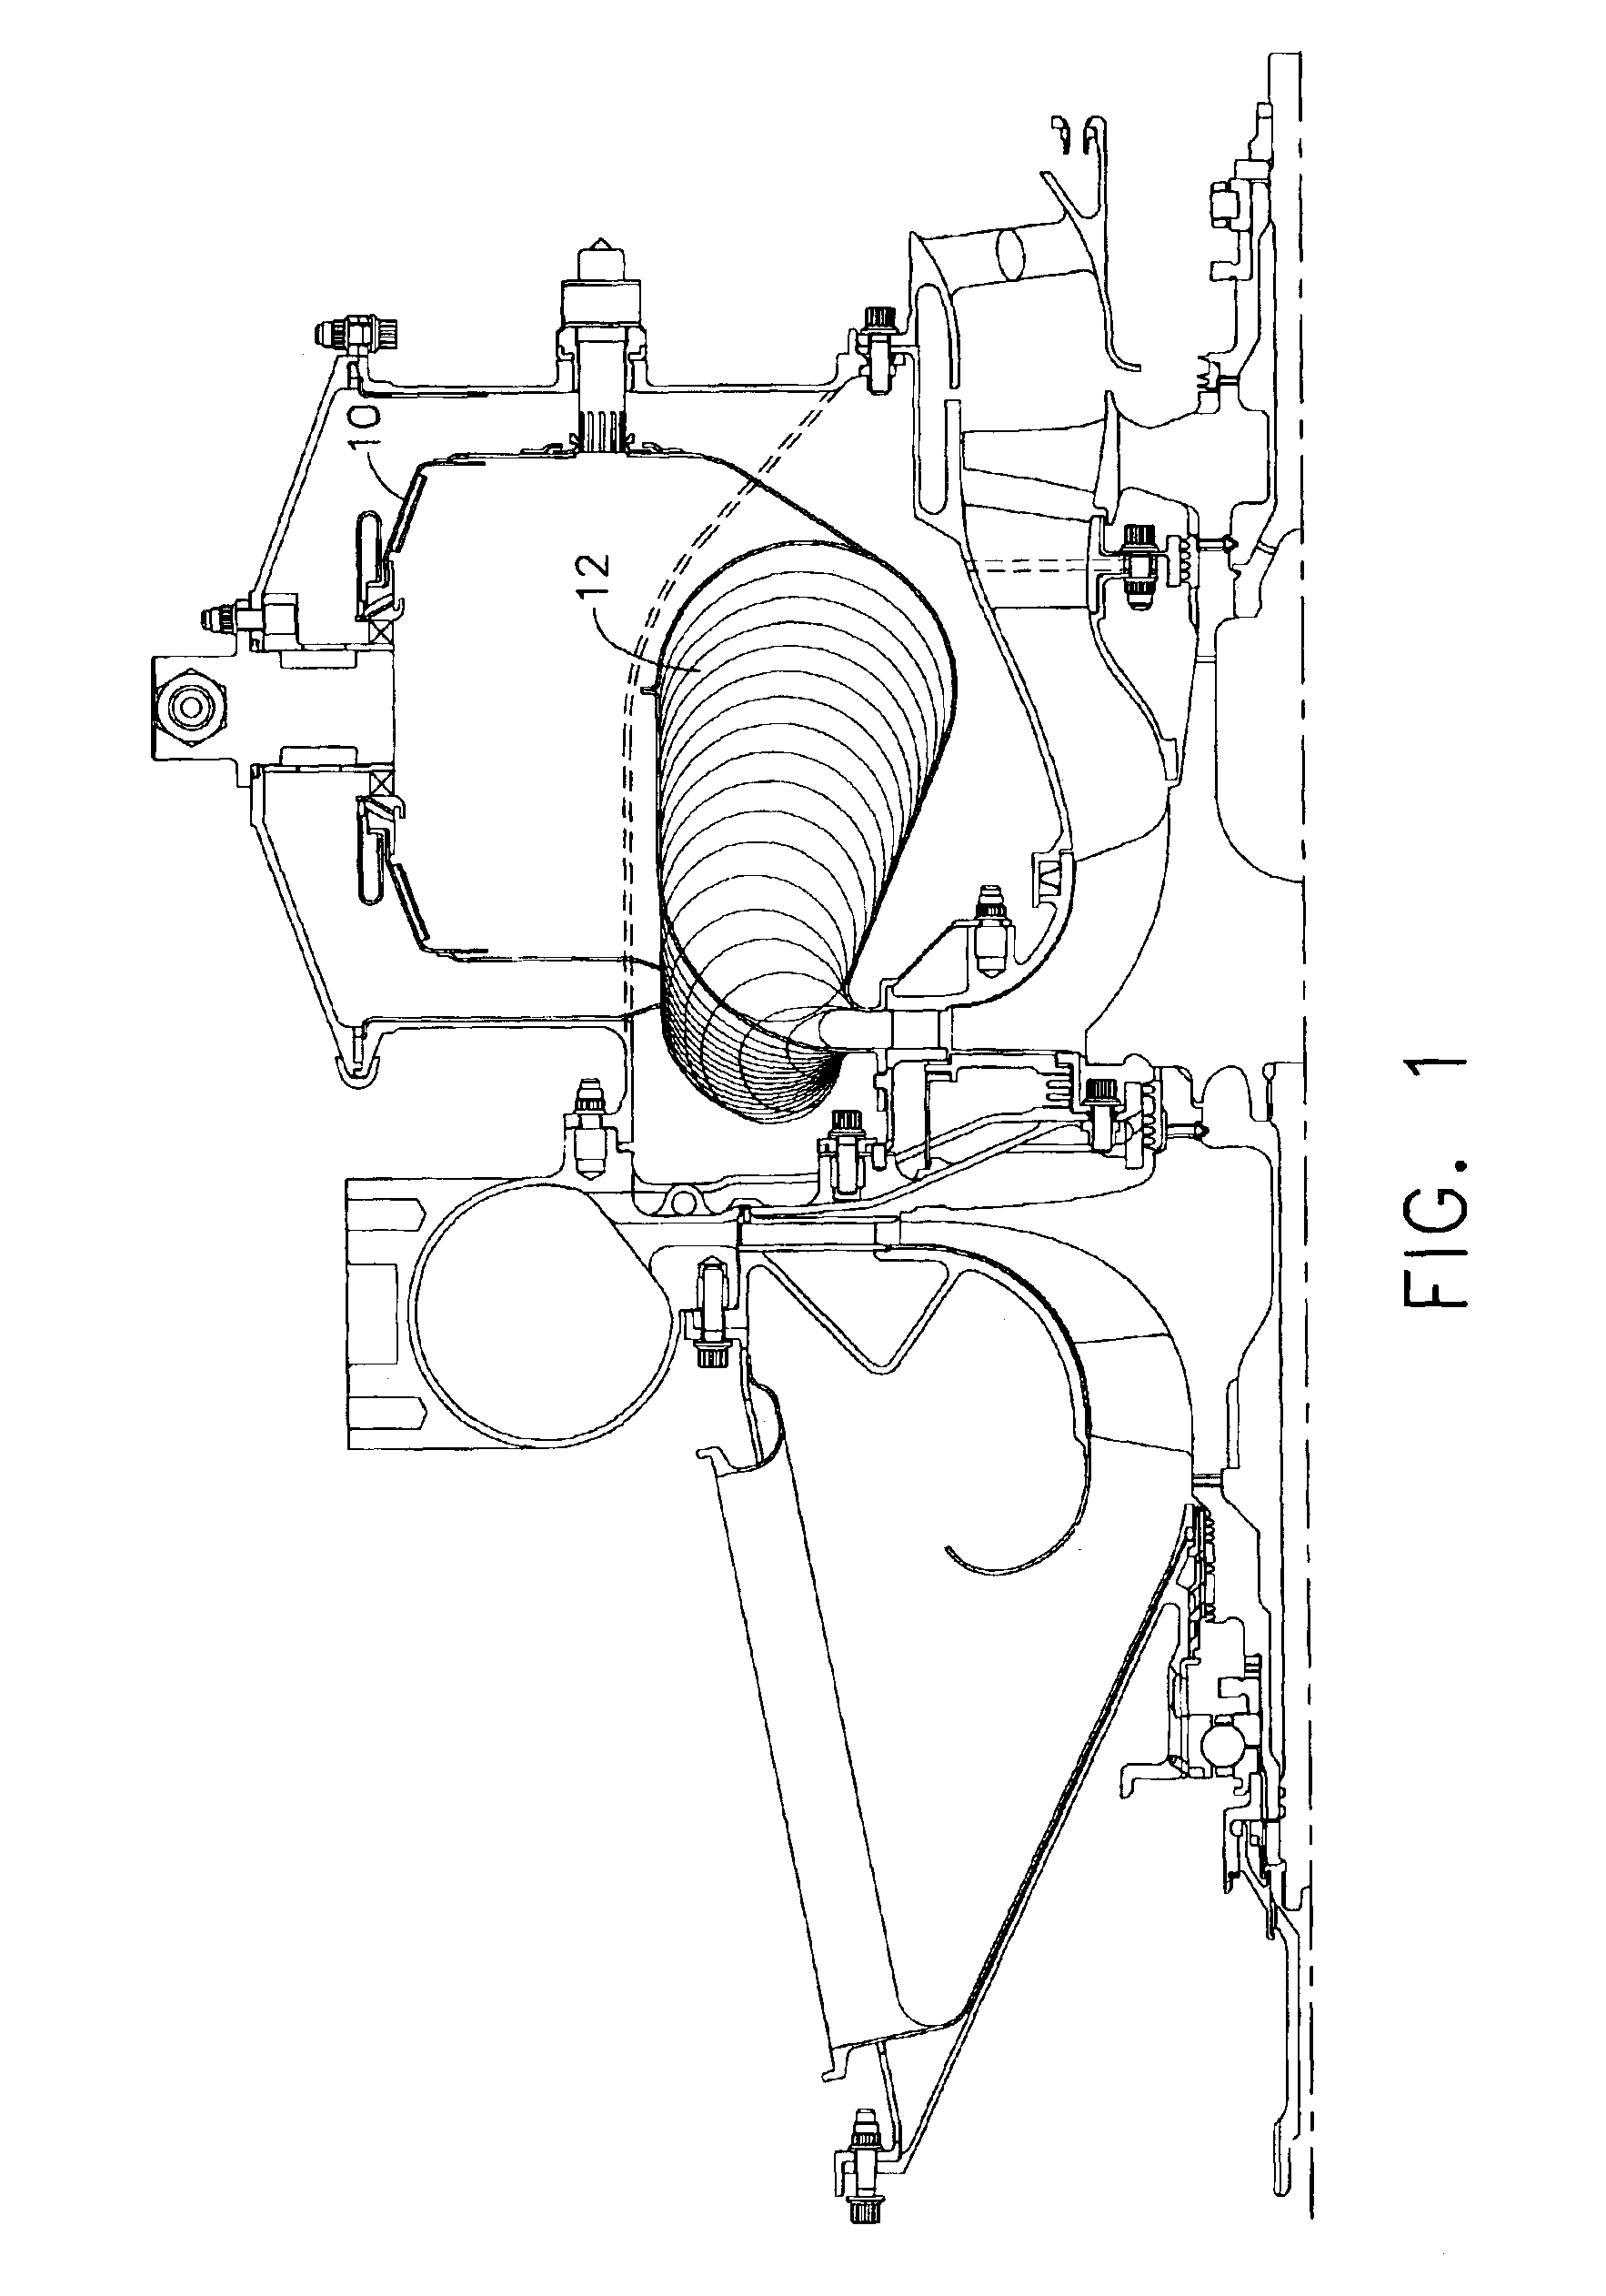 Multi-axial pivoting combustor liner in gas turbine engine